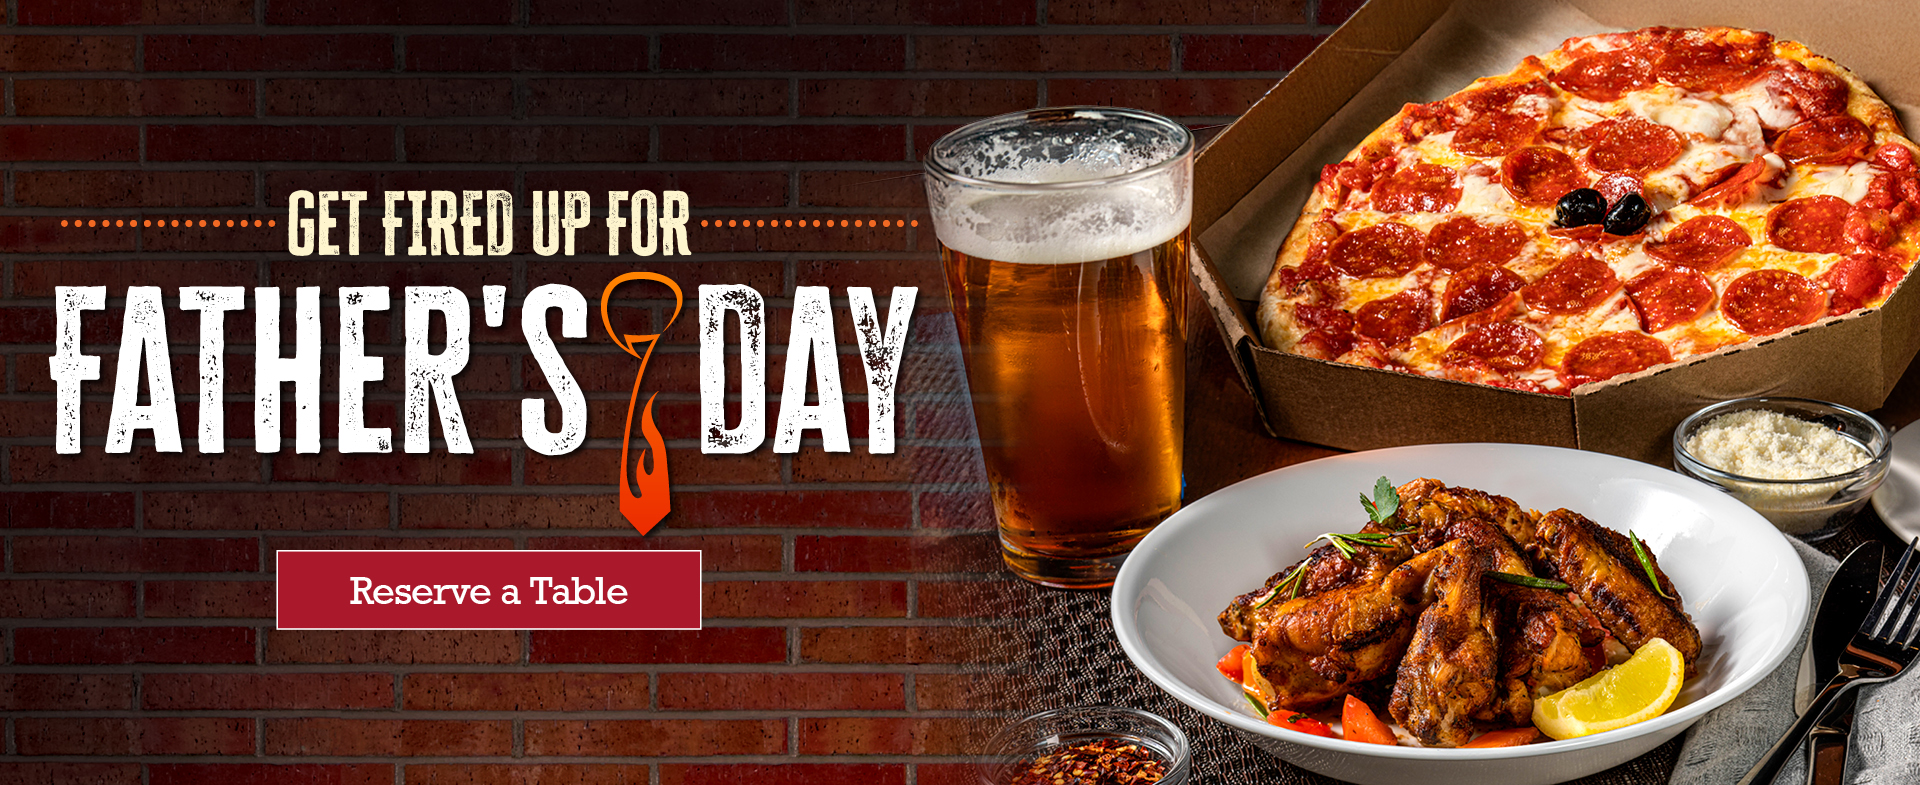 Get fired up for Father's Day. Reserve a table!